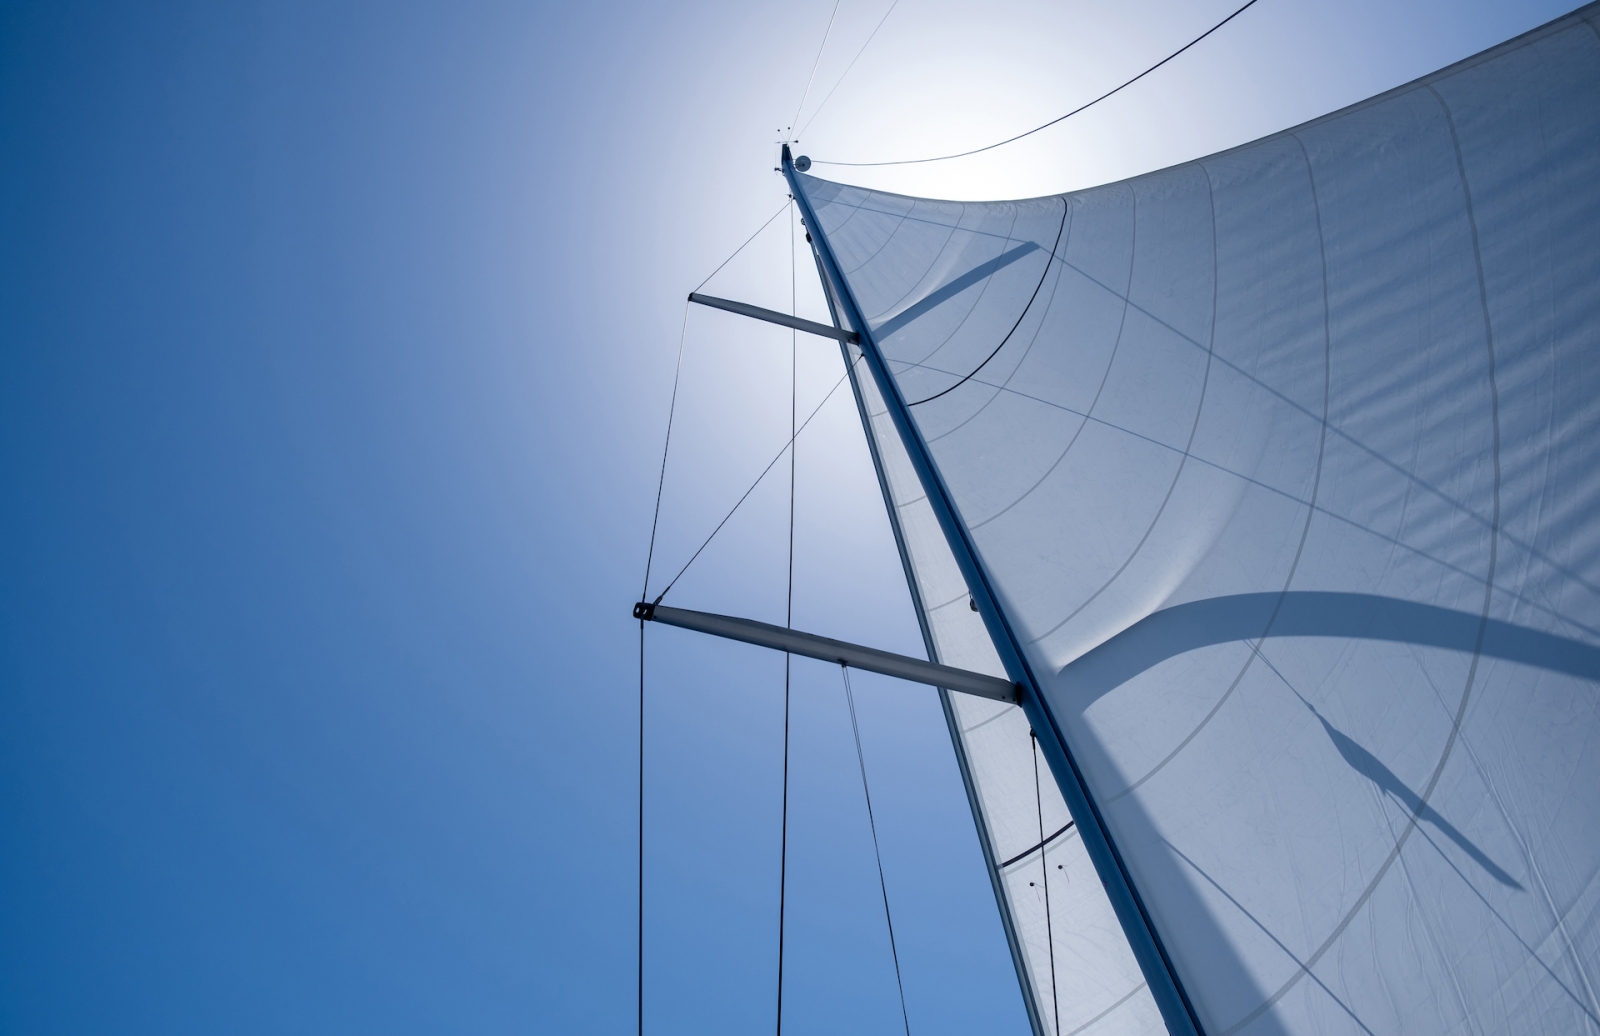 Sailing with the wind at open sea